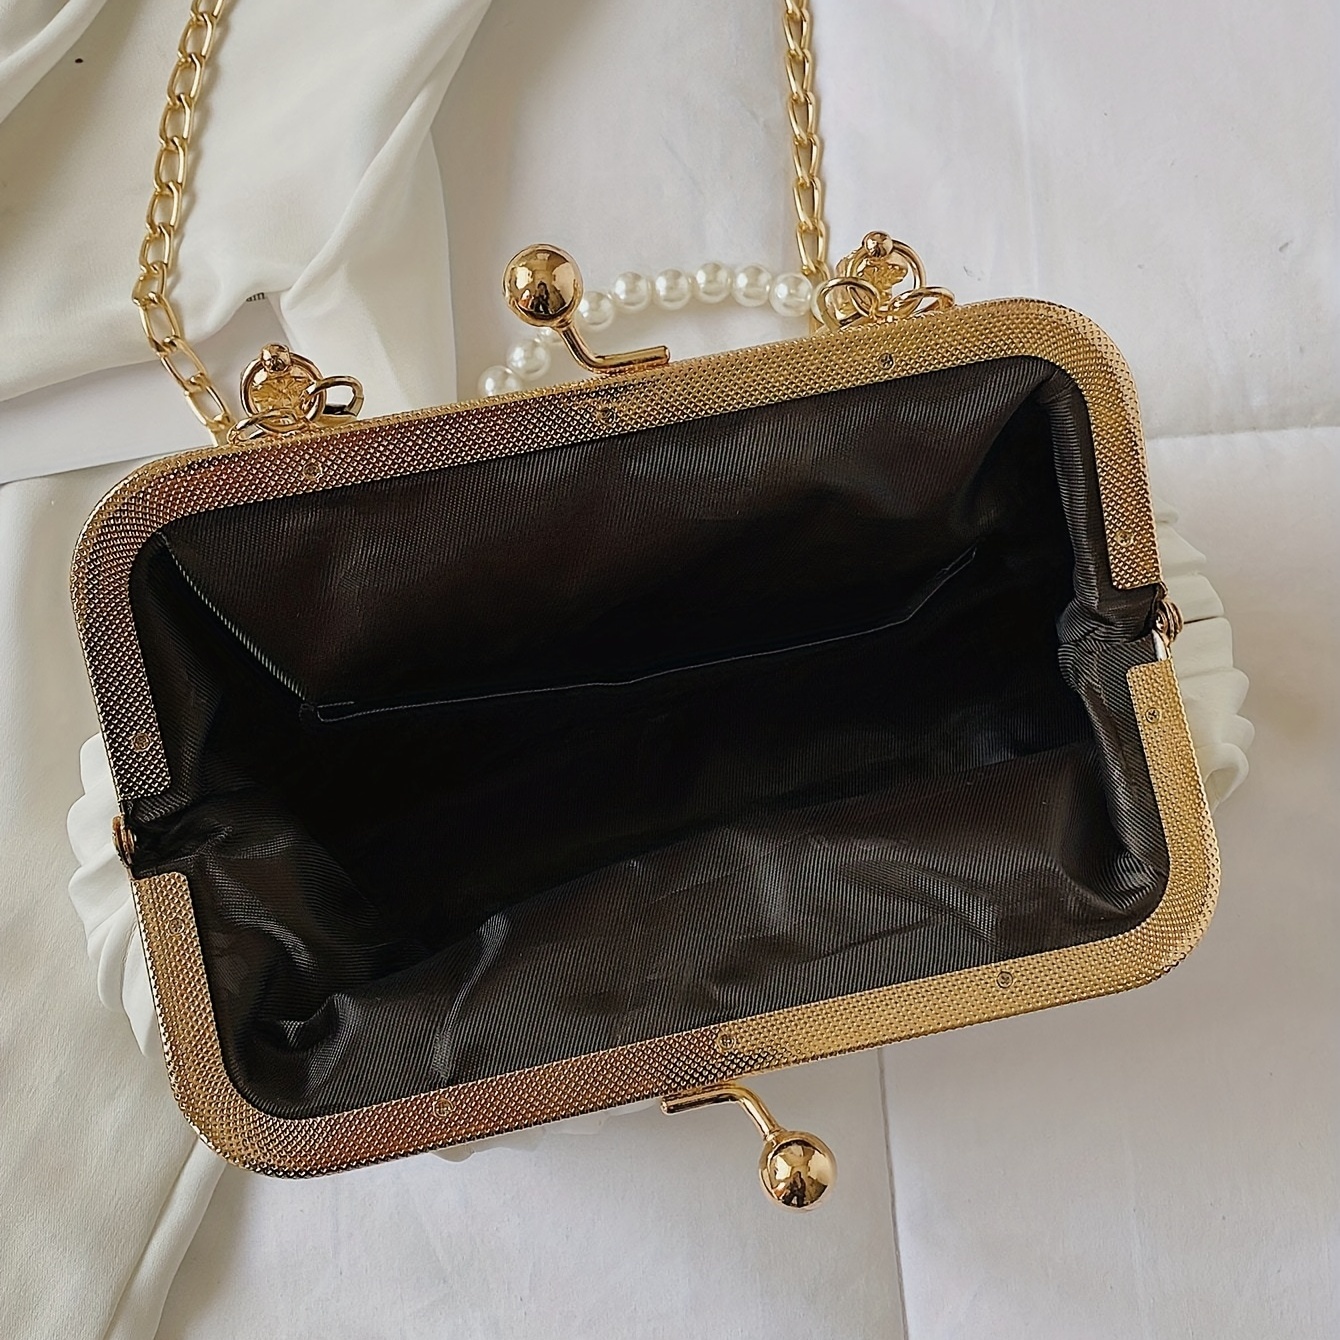 Women Patent Leather Clutch Bag With Crossbody Chain For Wedding